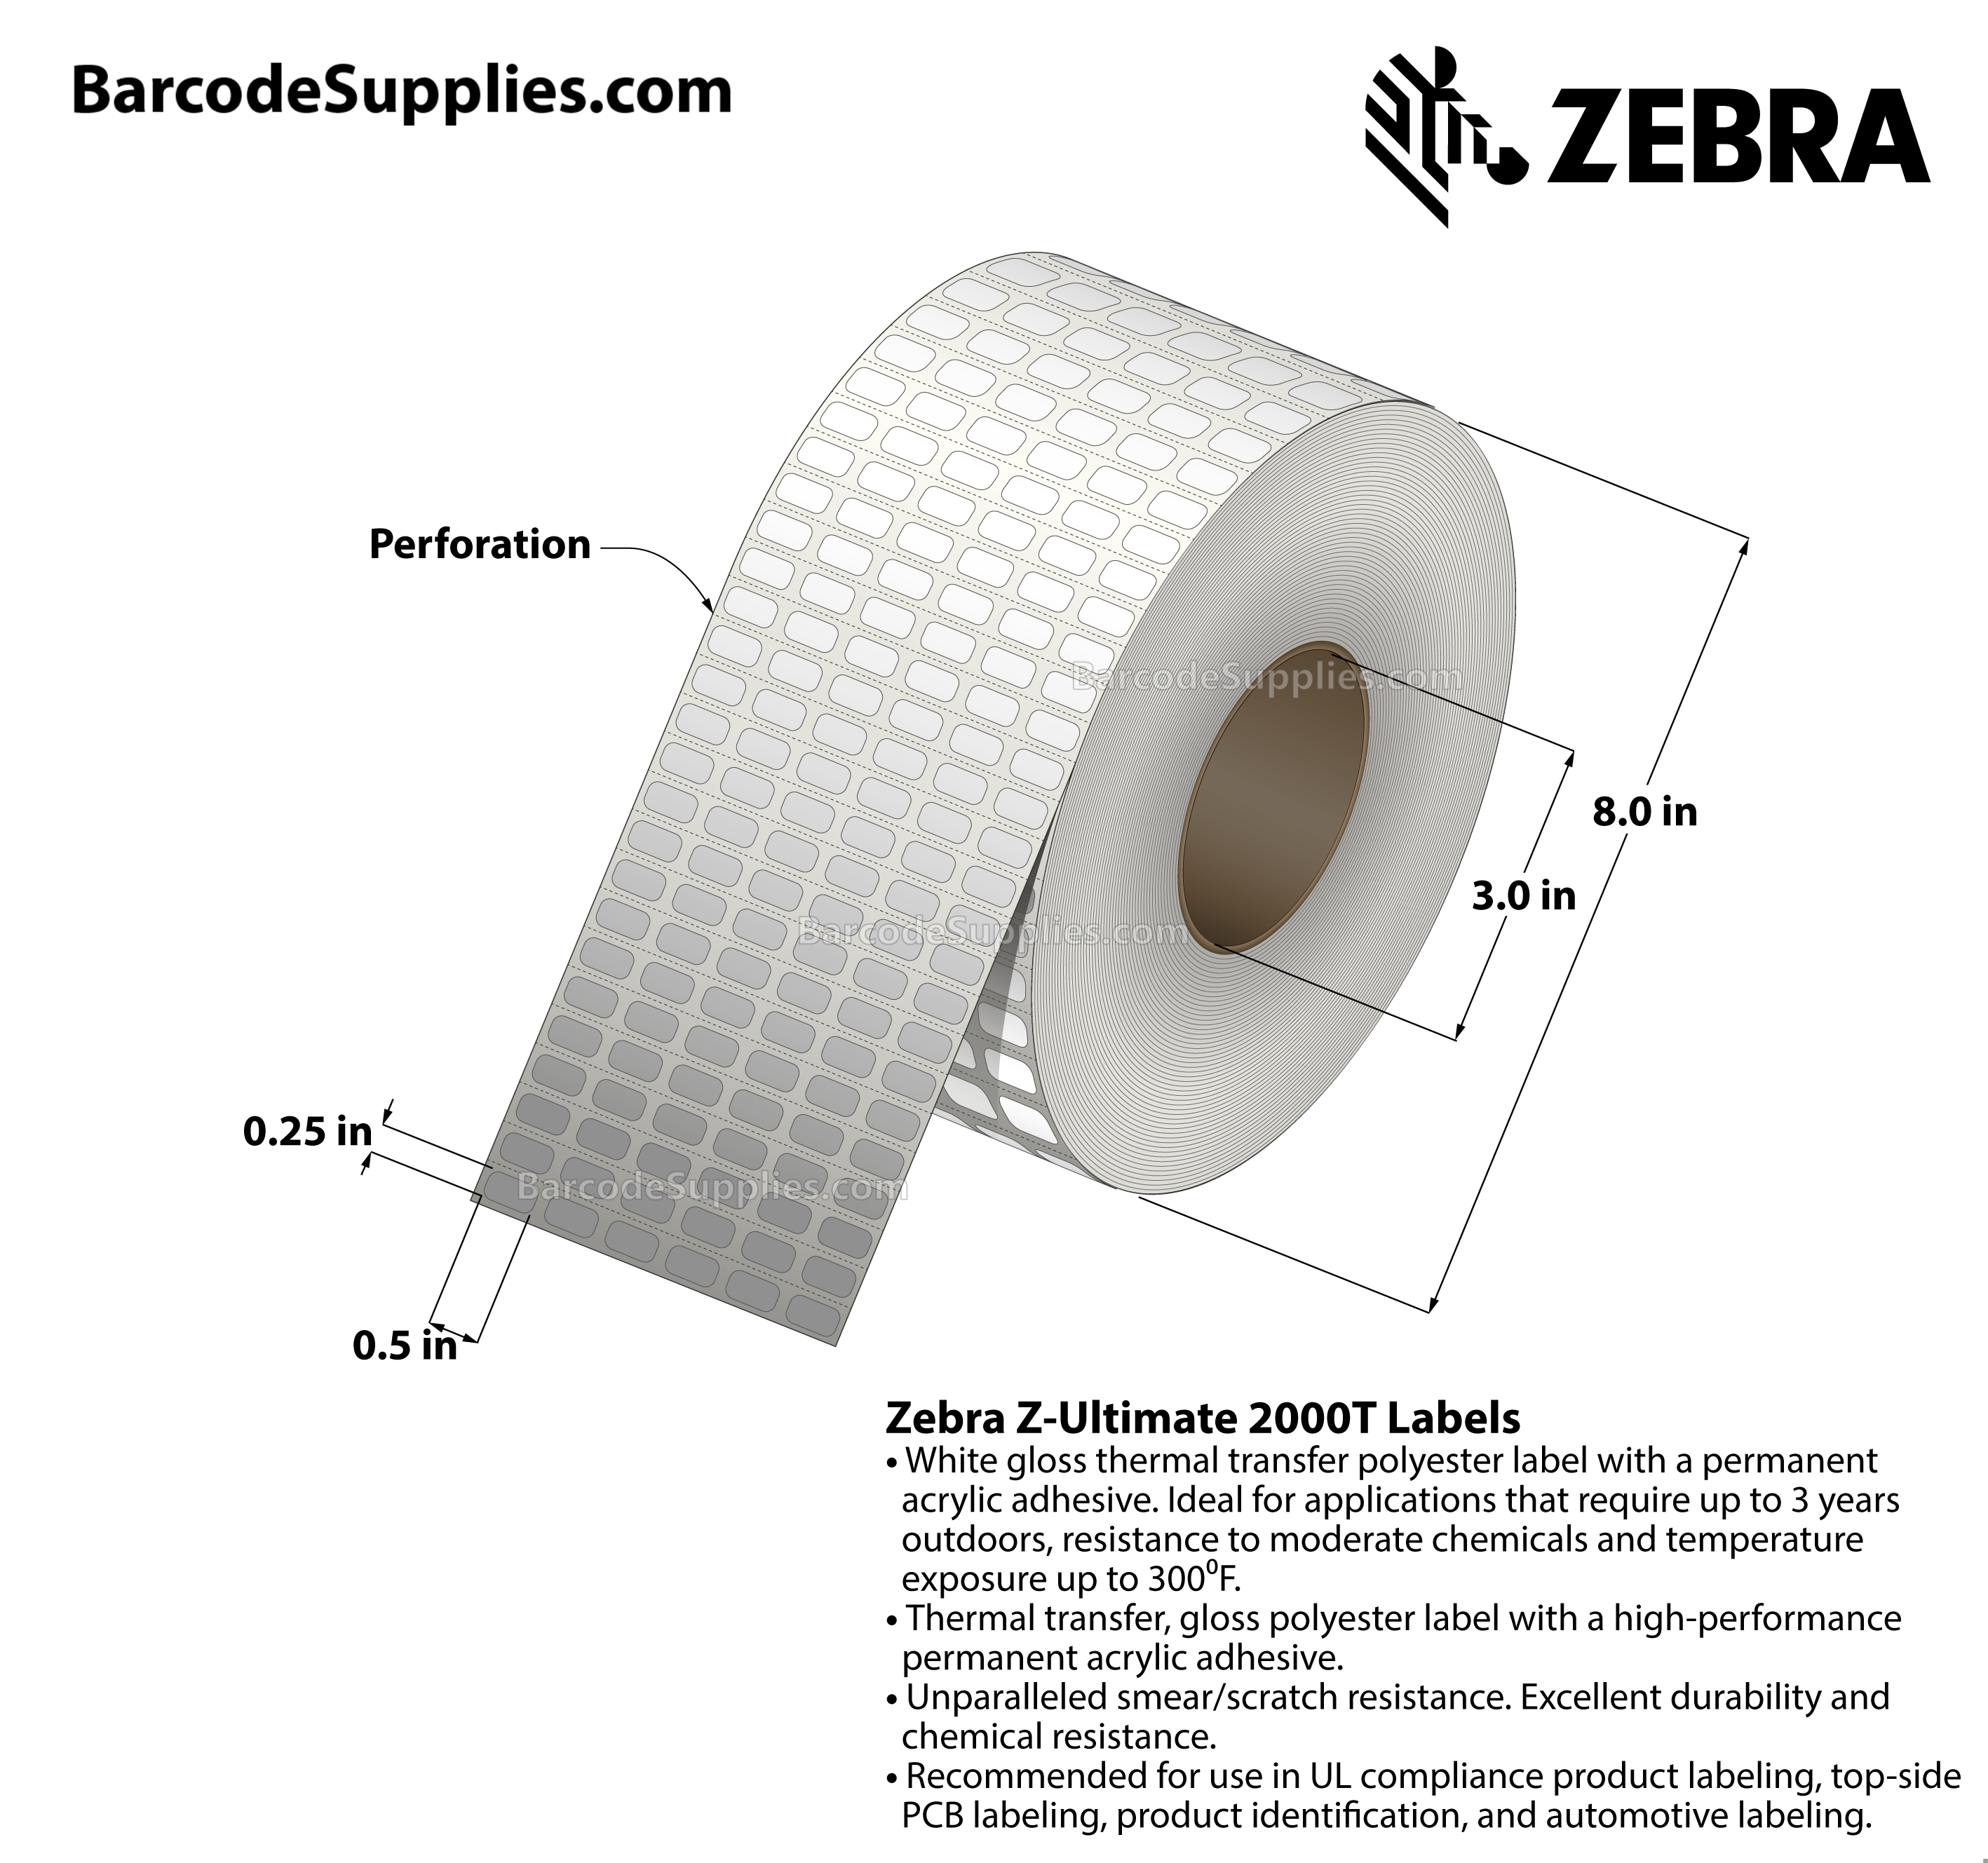 0.5 x 0.25 Thermal Transfer White Z-Ultimate 2000T (6-Across) Labels With Permanent Adhesive - Perforated - 9996 Labels Per Roll - Carton Of 4 Rolls - 39984 Labels Total - MPN: 10011969